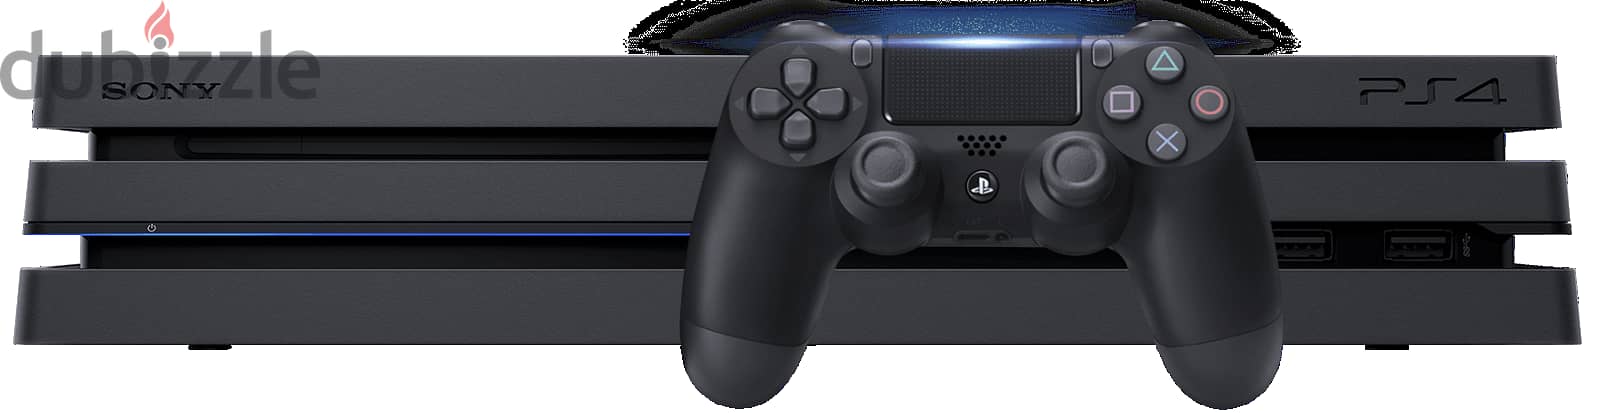 PlayStation 4 Console Pro 1TB - Used 1